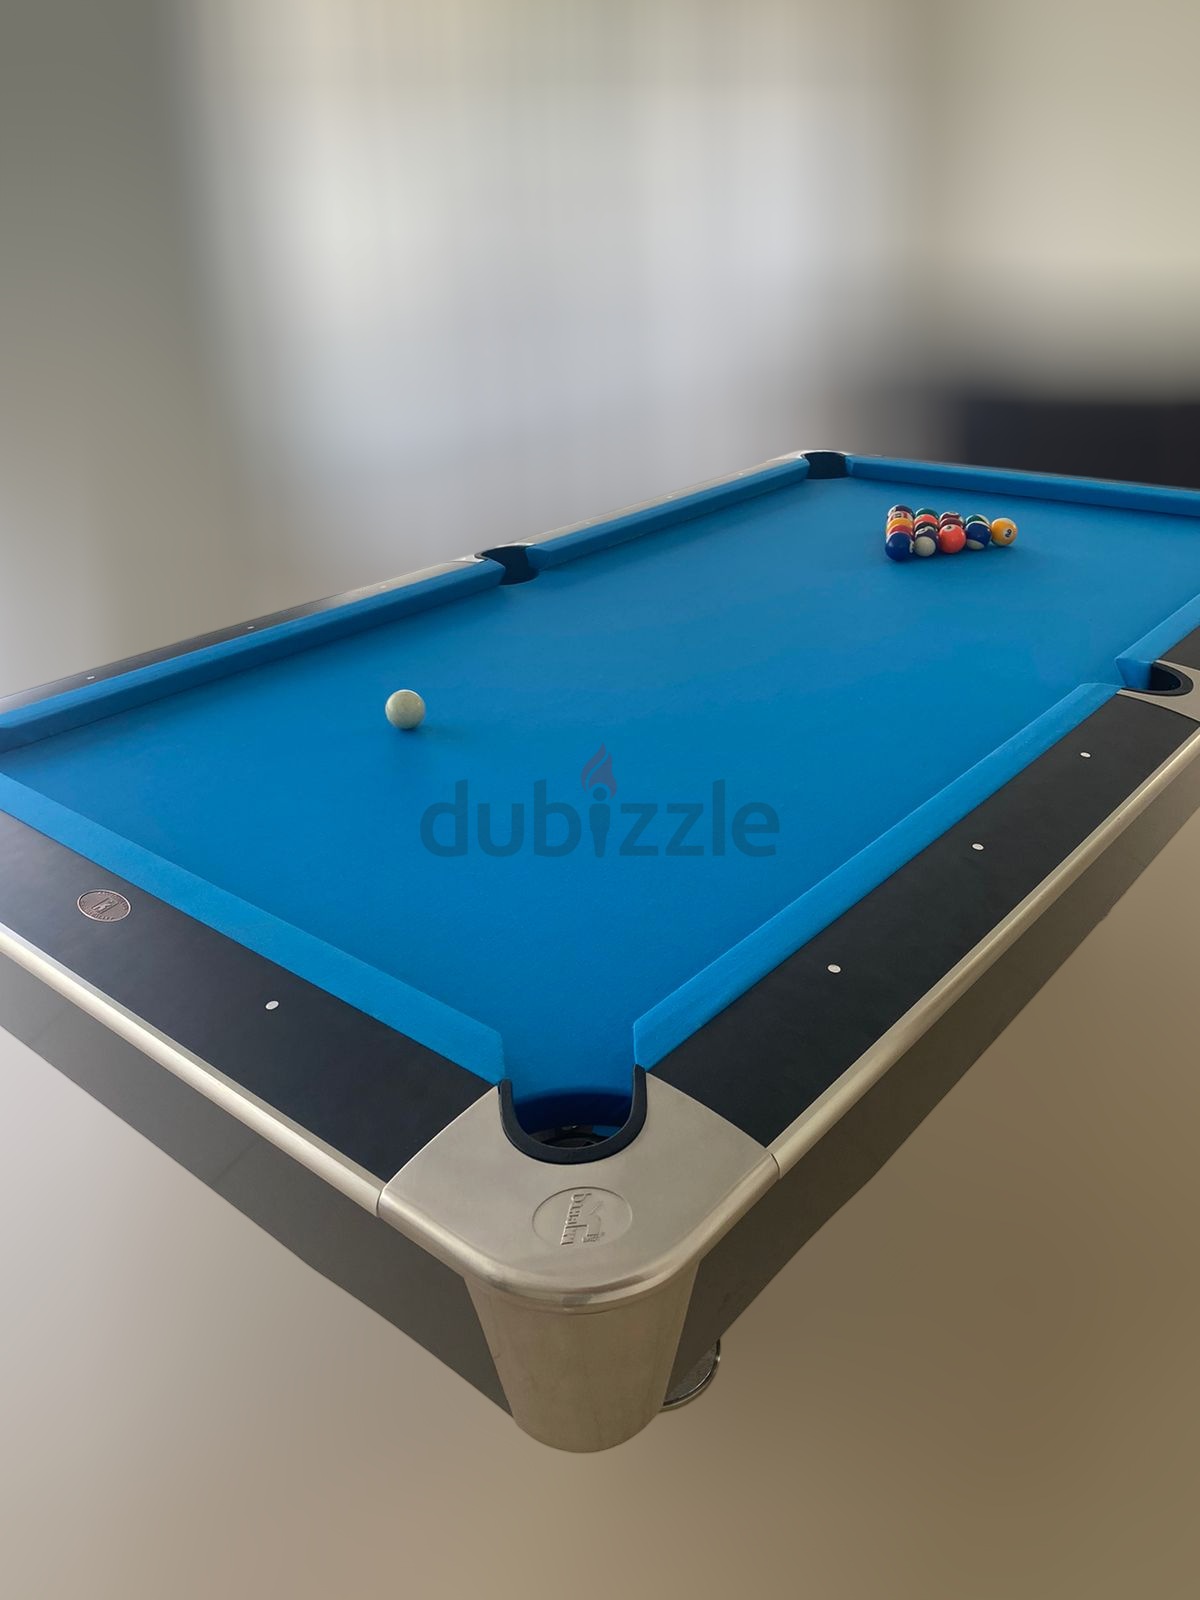 Used only once Knightshot Galaxy billiards pool table sale dubizzle